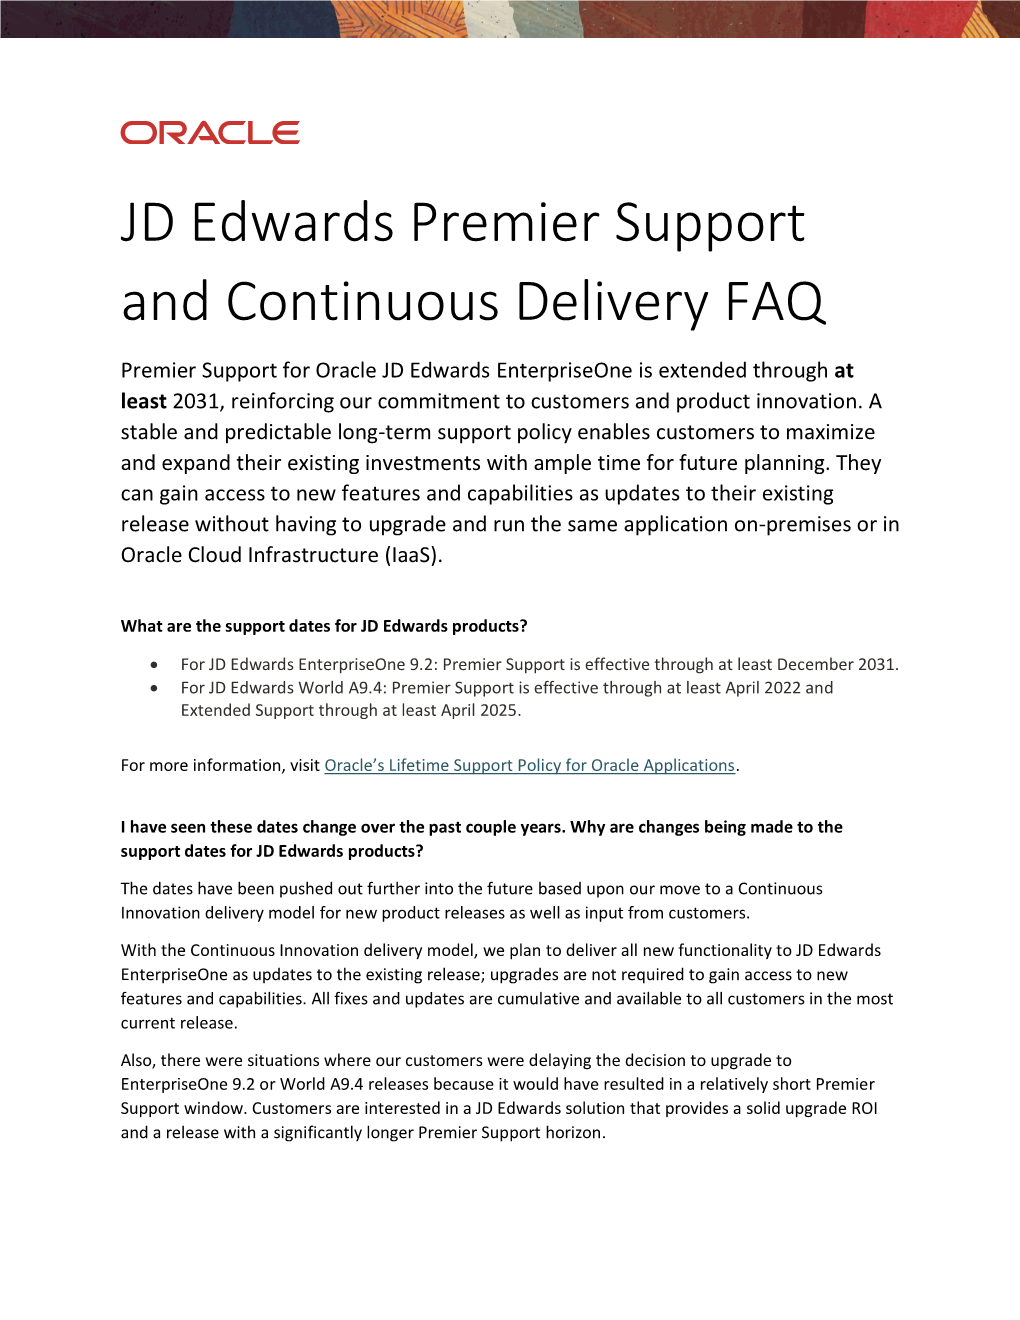 JD Edwards Premier Support and Continuous Delivery FAQ